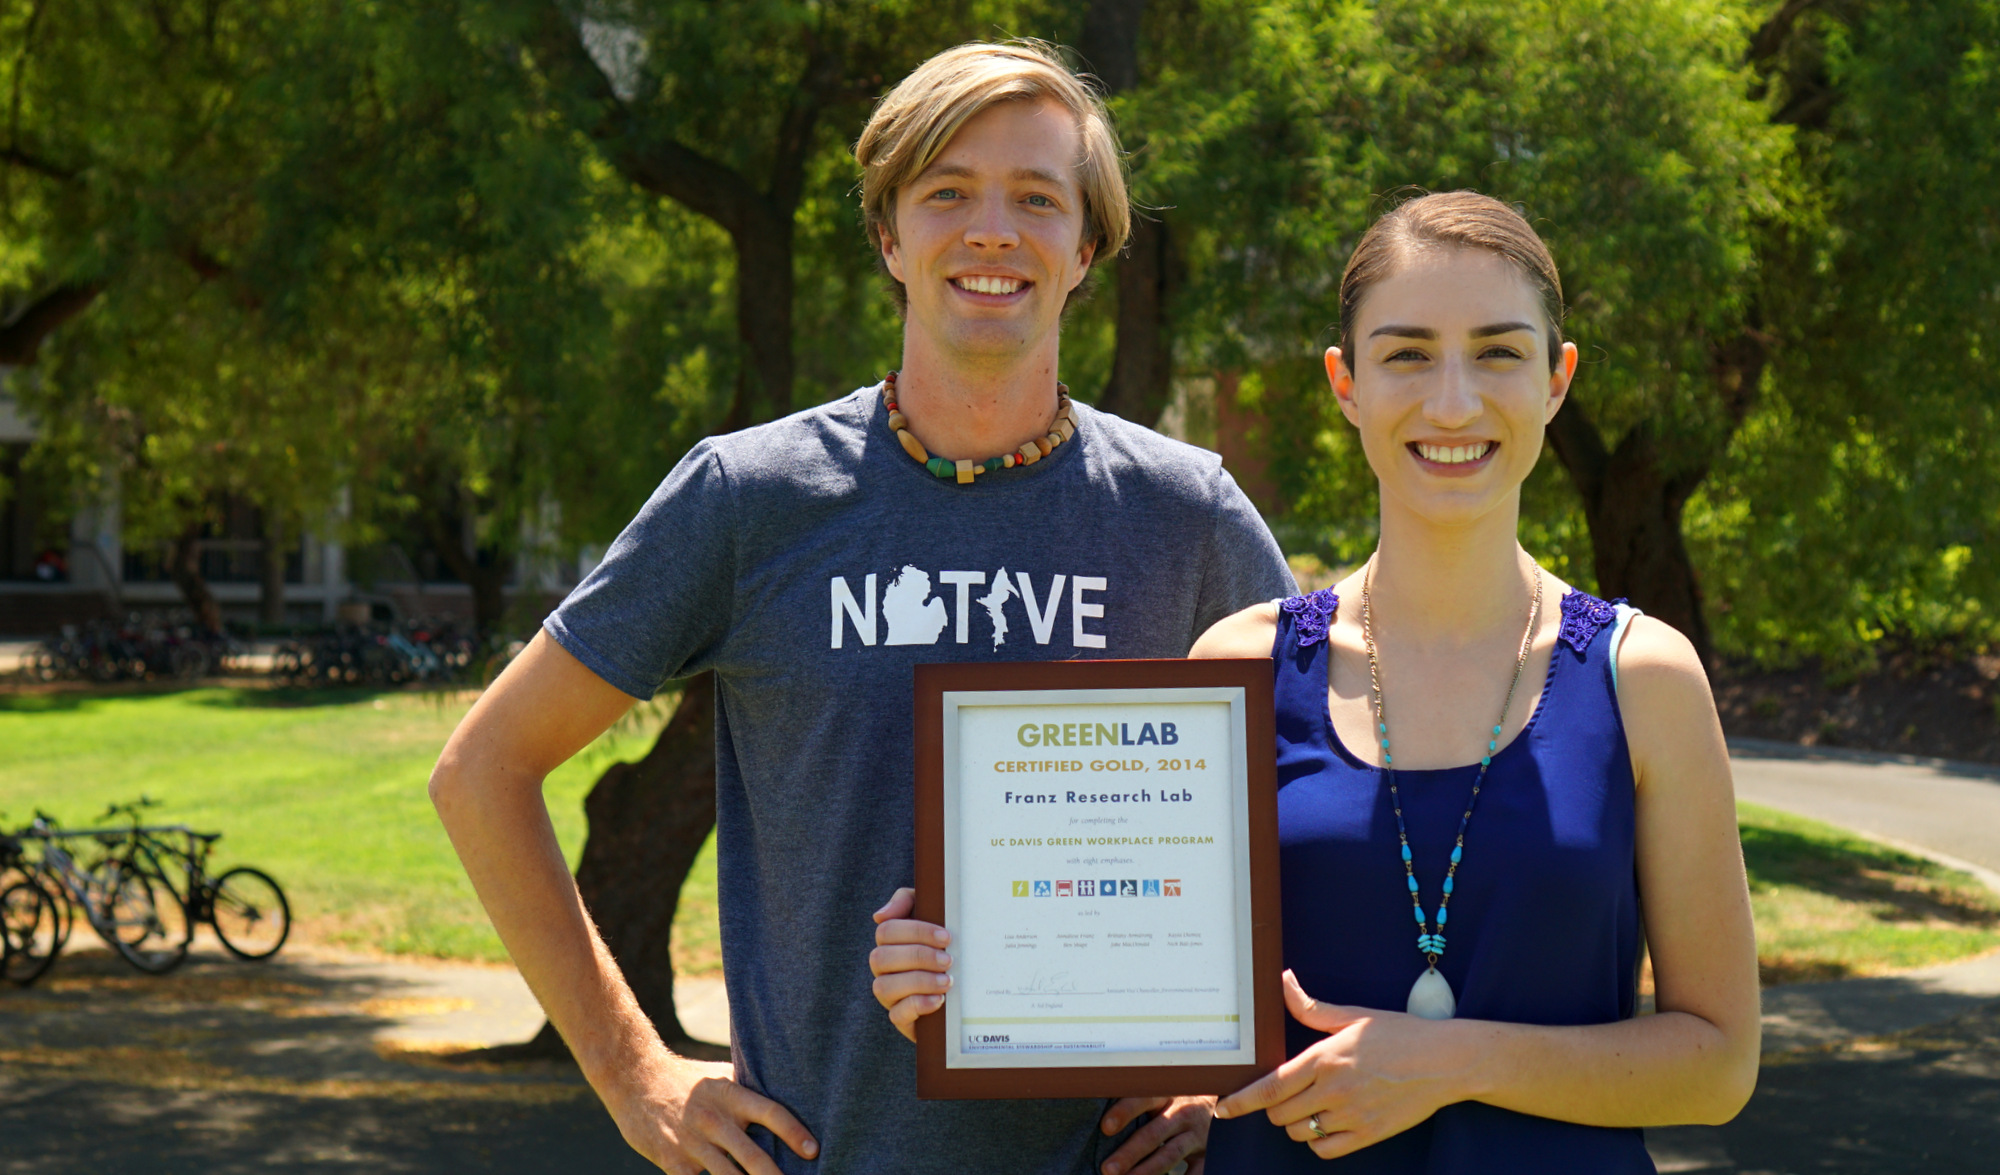 Graduate students Cody Yothers and Brittany Armstrong of the Franz Research Group show off their Green Lab certification. Graduate students and "Green Champions" Cody Yothers and Brittany Armstrong of the Franz Research Group show off their Green Lab certification.